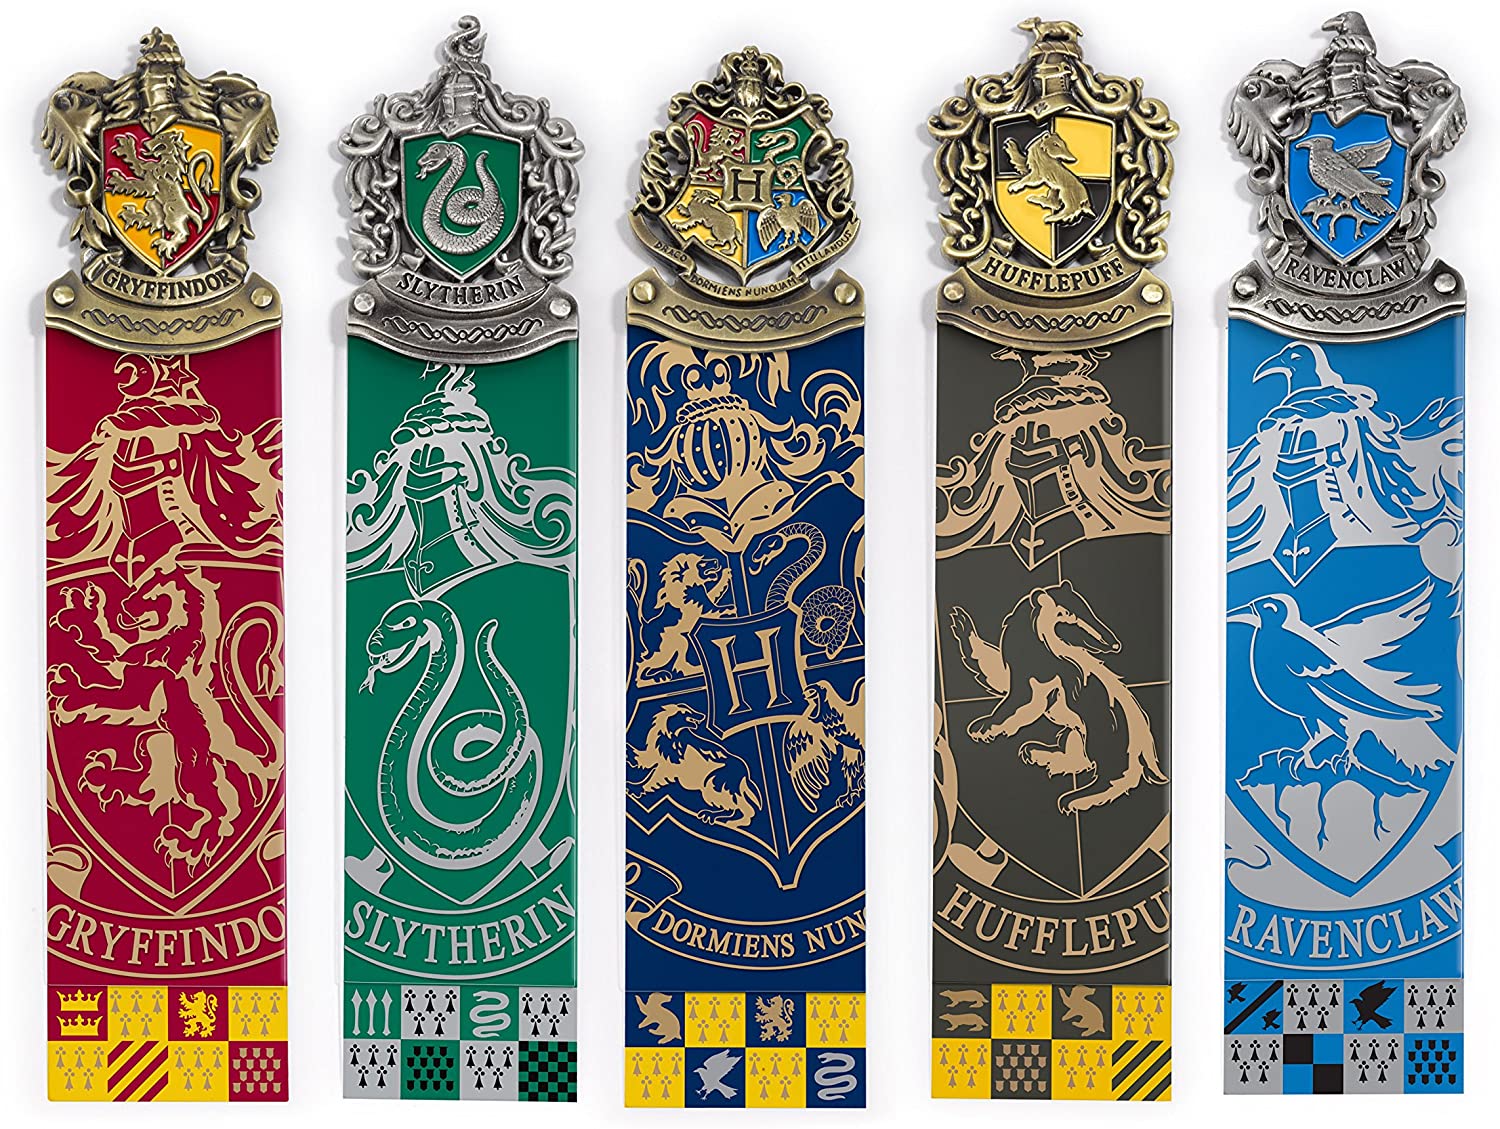 Harry Potter Crest Bookmark Collection  | Harry Potter gift ideas | cool Harry Potter gift ideas | magical Harry Potter gift ideas | cute Harry Potter gift ideas | what to gift a harry potter fan | what is the best gift for a harry potter fan | the ultimate harry potter gift | the best harry potter gift ideas | harry potter gift for girl | harry potter gift for teacher | harry potter gift for kids | harry potter gift to buy | harry potter gift for adults | harry potter gift for him | harry potter gift for her | harry potter gift for boyfriend | harry potter gift for girlfriend | harry potter gift amazon | harry potter anniversary gift | harry potter gift bag ideas | harry potter gift box ideas | harry potter gift guide | harry potter official gift shop | harry potter gift set | Harry Potter gift guide | the best harry potter gift ideas | what to get someone who loves harry potter | harry potter hufflepuff gift ideas | harry potter Gryffindor gift ideas | harry potter Ravenclaw gift ideas | harry potter Slytherin gift ideas | harry potter graduation gift ideas | good harry potter gift ideas | great harry potter gift ideas | harry potter baby shower gift ideas | harry potter themed wedding gift ideas | unique harry potter gift ideas | harry potter valentines gift ideas | potterhead gift ideas | best potterhead gifts | cool potterhead gift ideas | Harry Potter gifts for men | Harry Potter gift box | Harry Potter gifts uk | harry potter gifts for tweens | harry potter gift basket | harry potter gift set | Harry Potter stocking stuffers | Harry Potter Christmas gifts | fantastic beasts gift guide